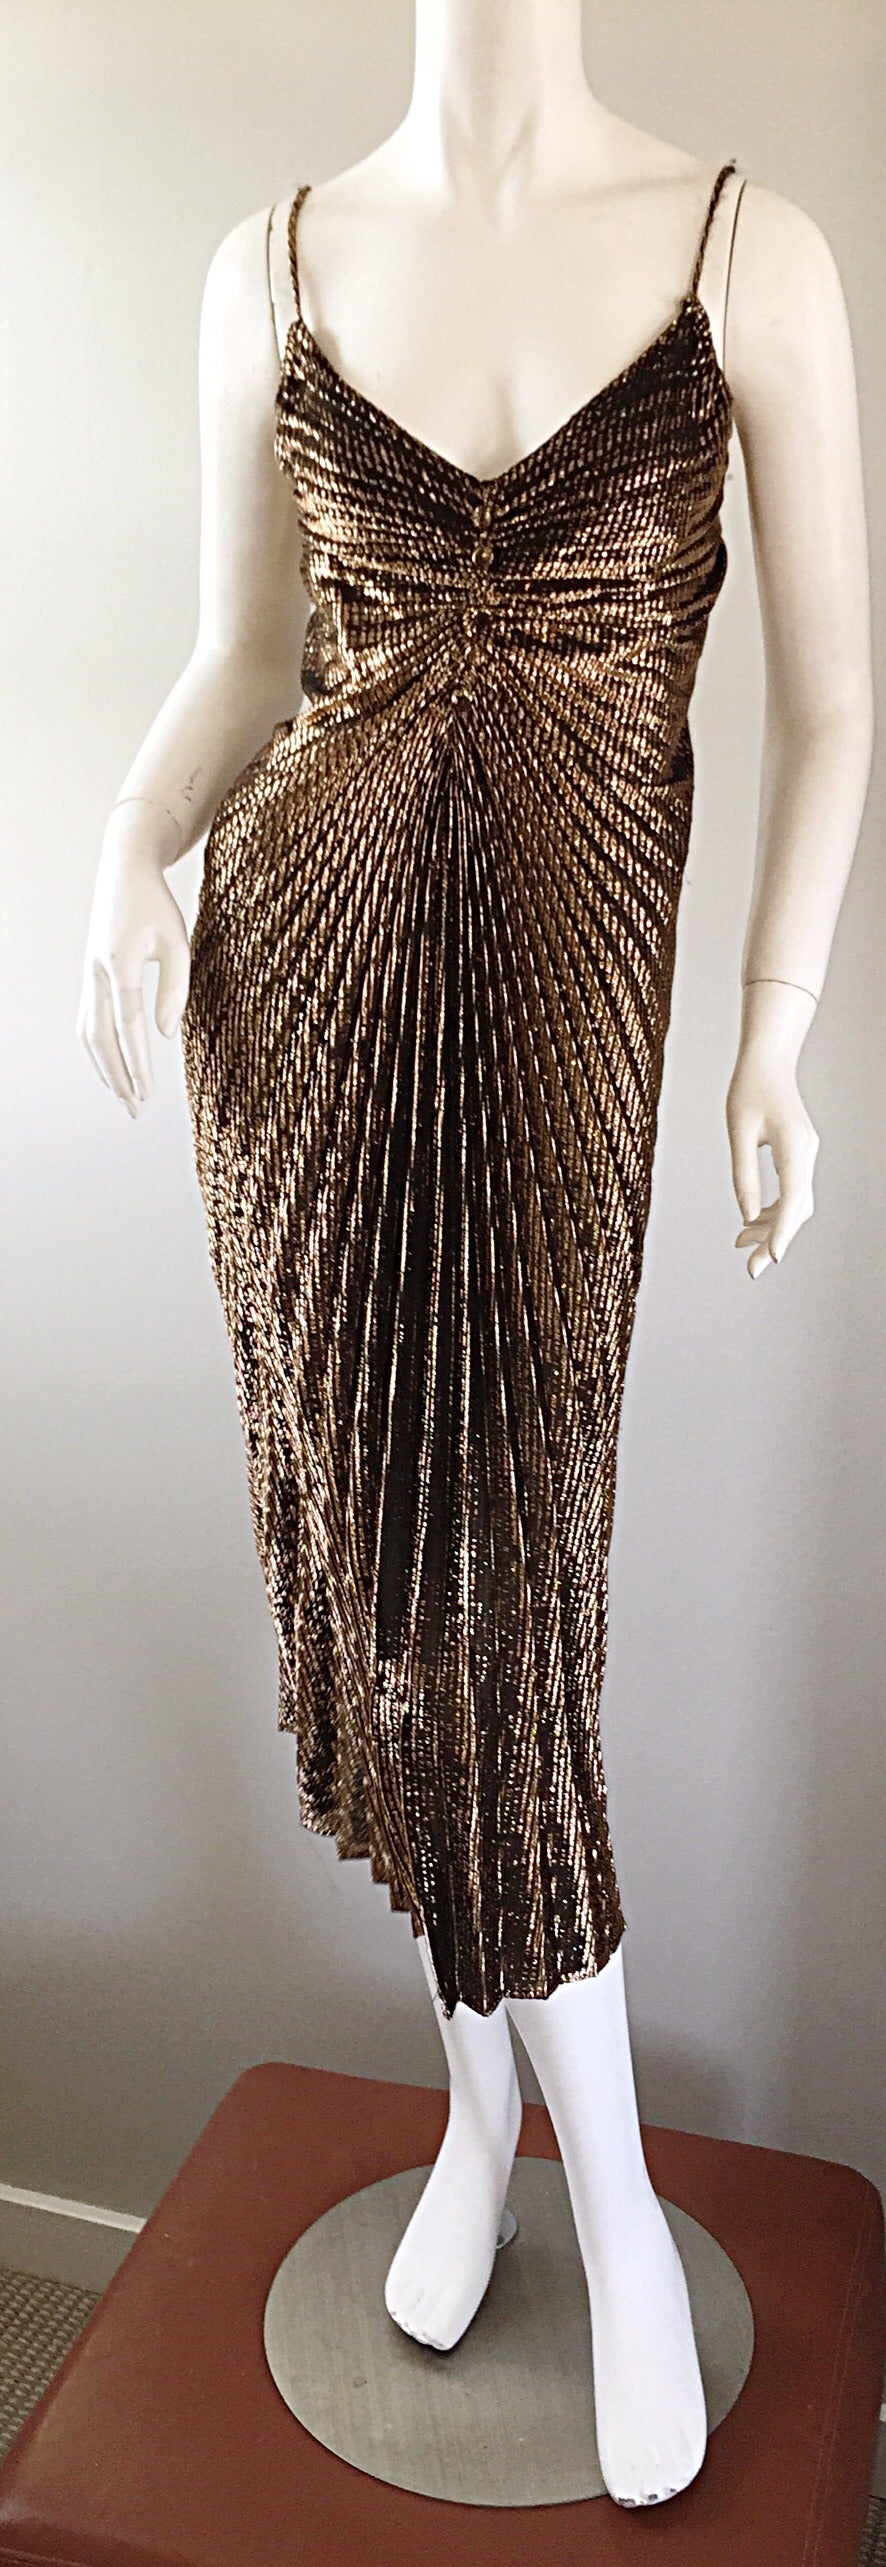 Sexy 70s disco dress!!! Striking bronze color, with accordion pleats throughout, which make for a very flattering feminine fit. Mock buttons (covered in same fabric) at bust. Perfect for your next Cocktail Party, or night out. Perfect from day to